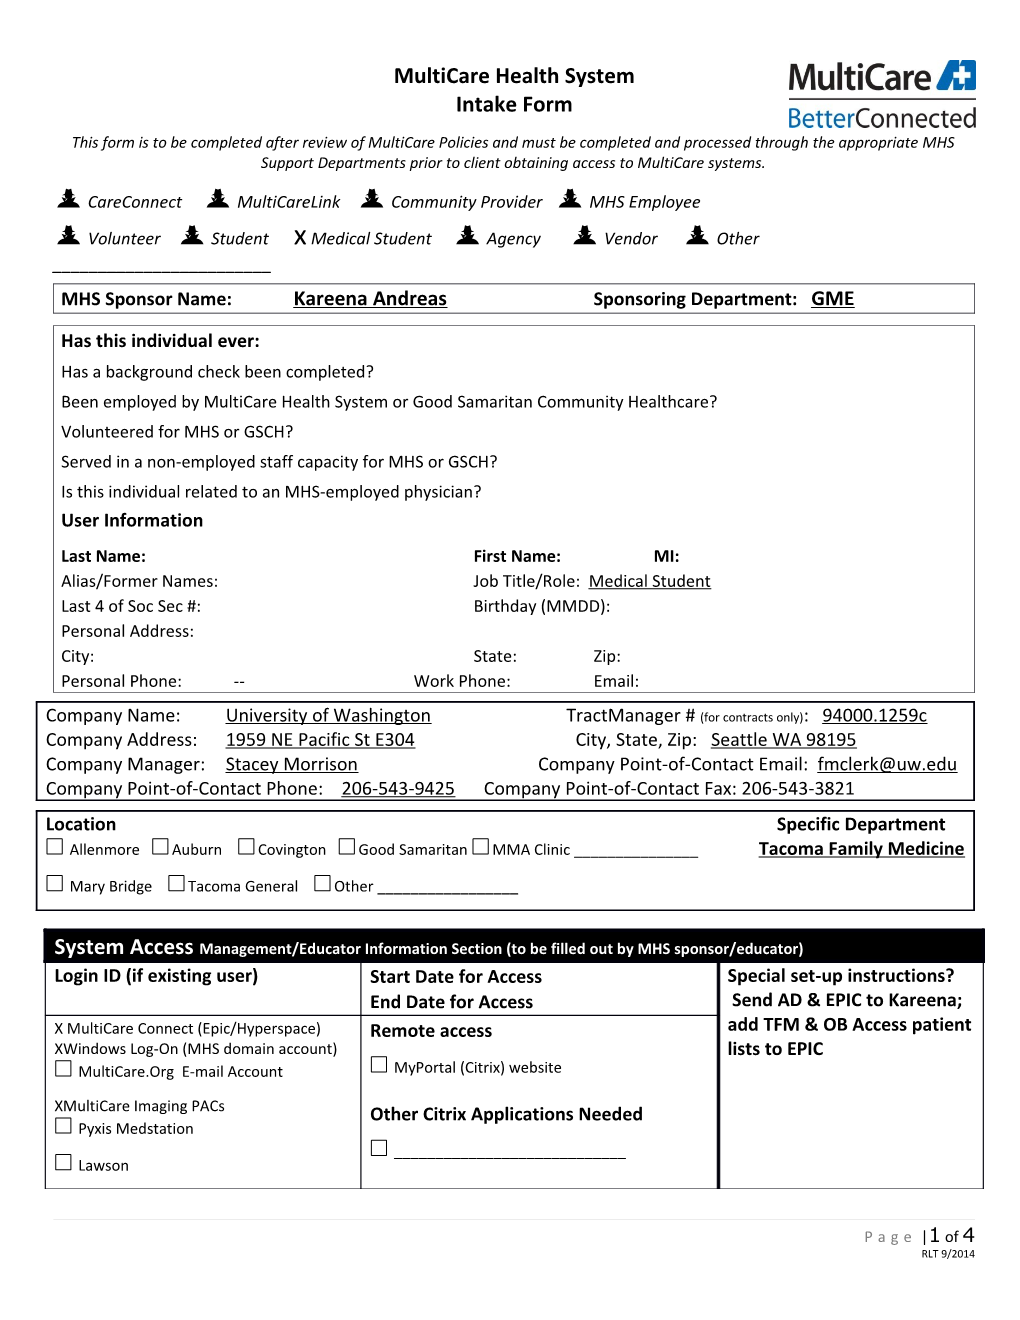 MHS Intake Form (Intended for Info Gathering to Input Into IS Service Portal Request)